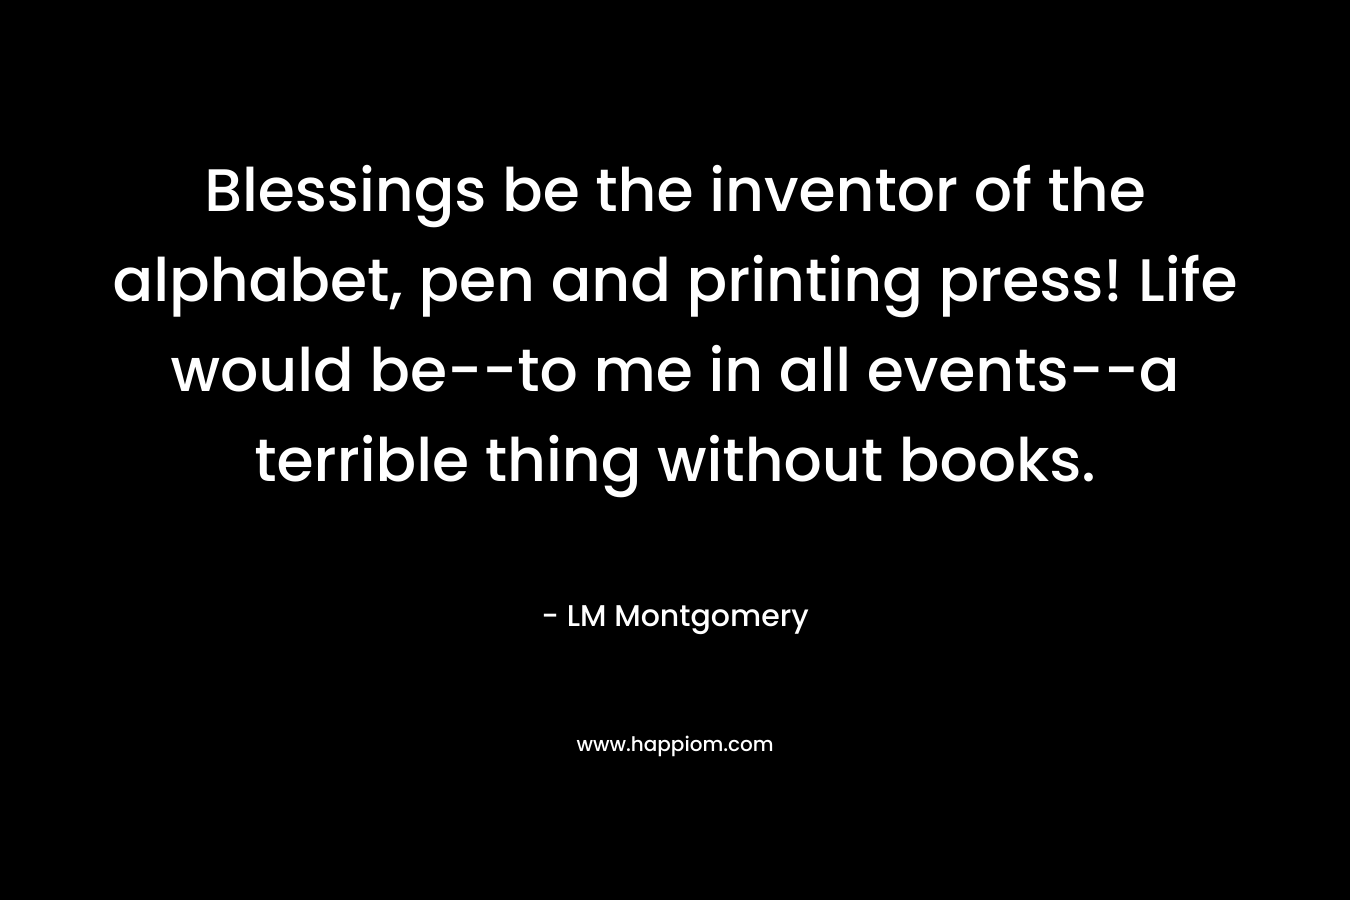 Blessings be the inventor of the alphabet, pen and printing press! Life would be--to me in all events--a terrible thing without books.